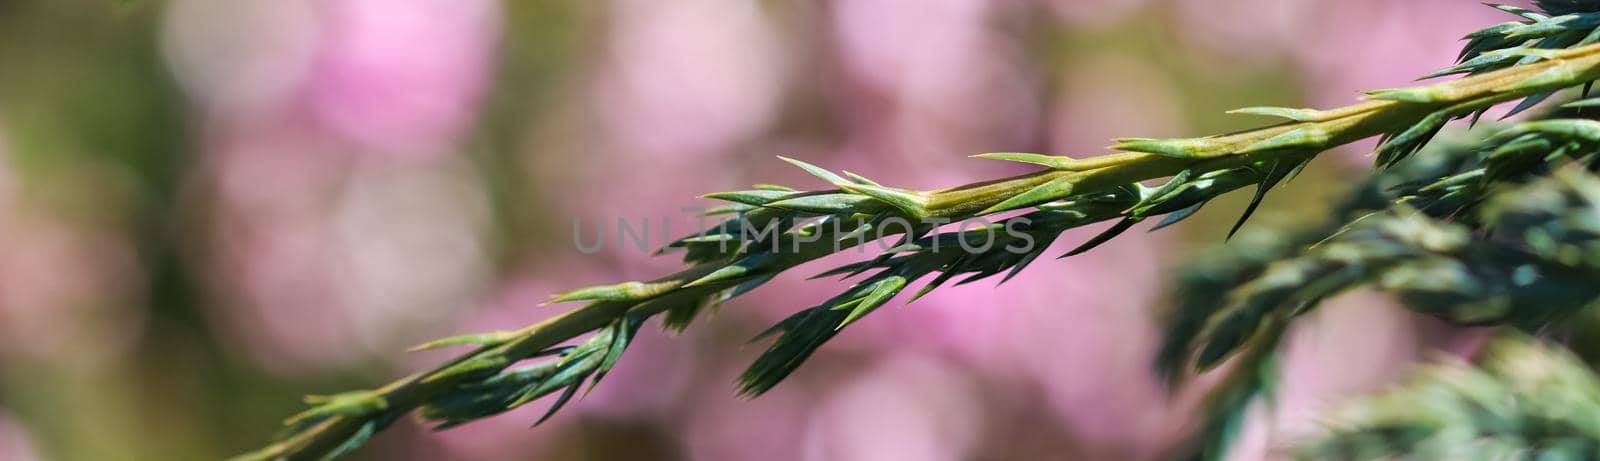 Blue evergreen conifer branches of Juniperus squamata Blue Carpet on a blurred background of pink flowers in the garden